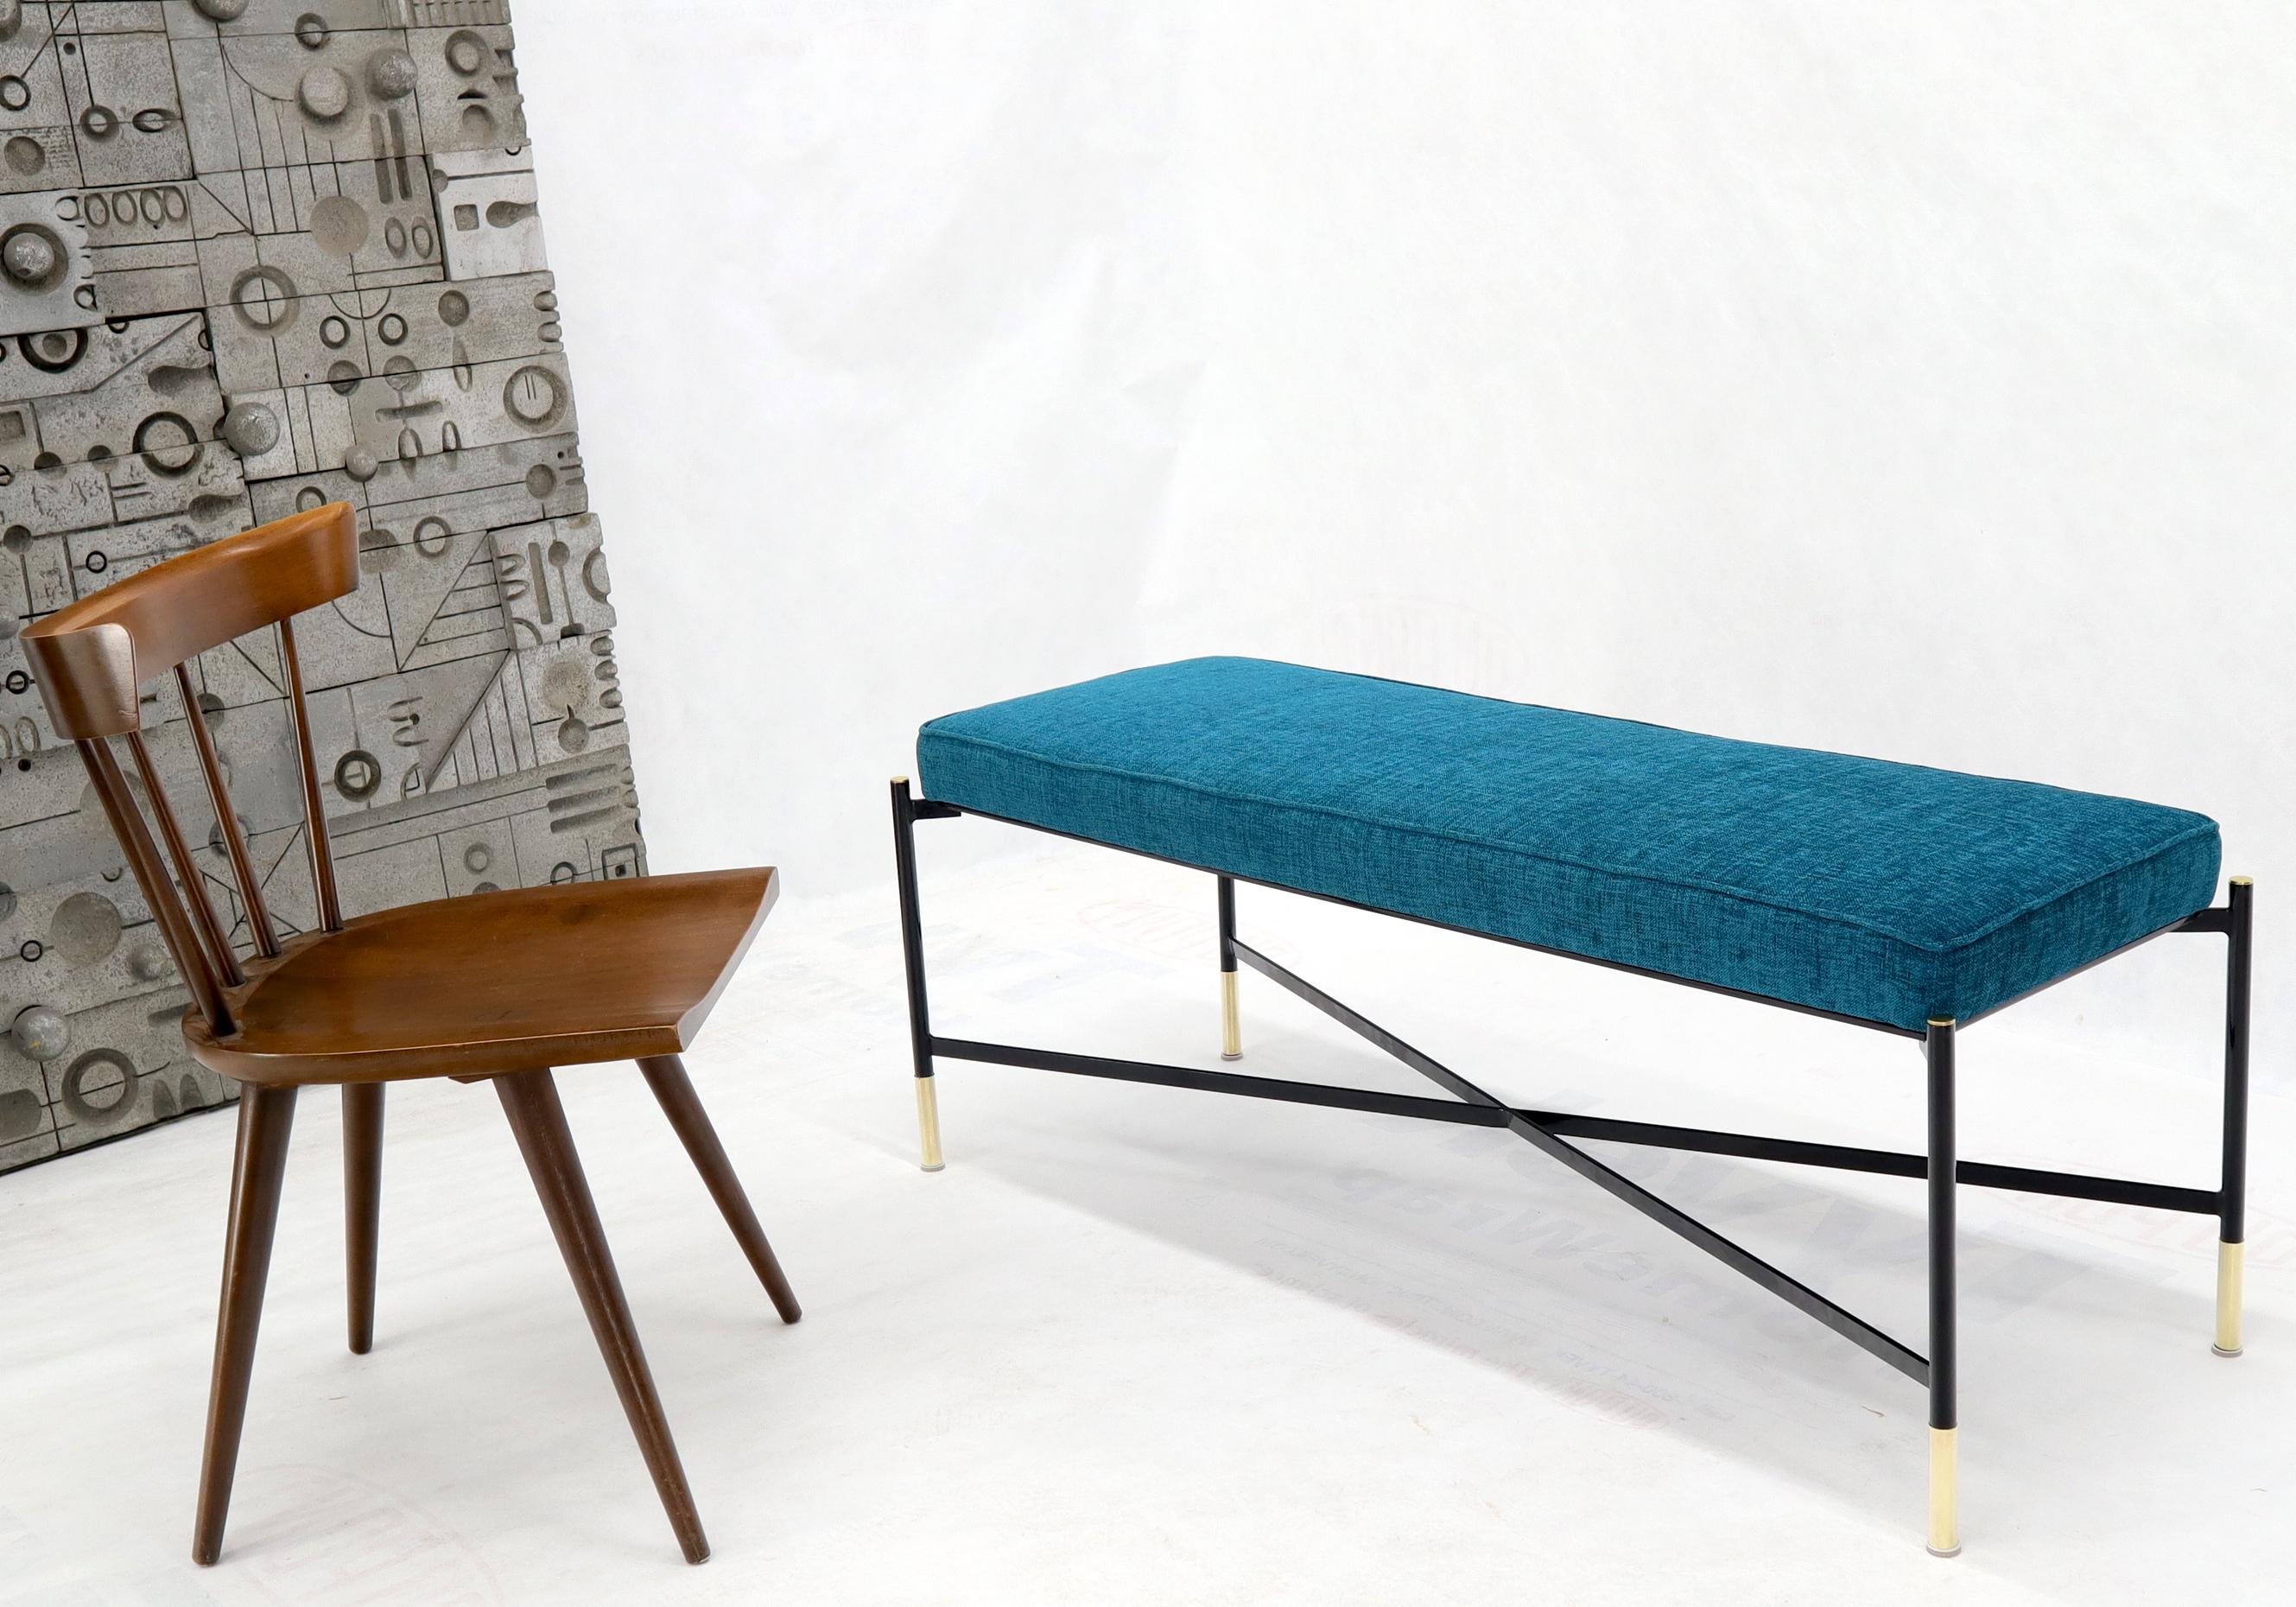 Pair of Italian Mid-Century Modern New Blue Upholstery X-Stretchers Benches In Excellent Condition For Sale In Rockaway, NJ